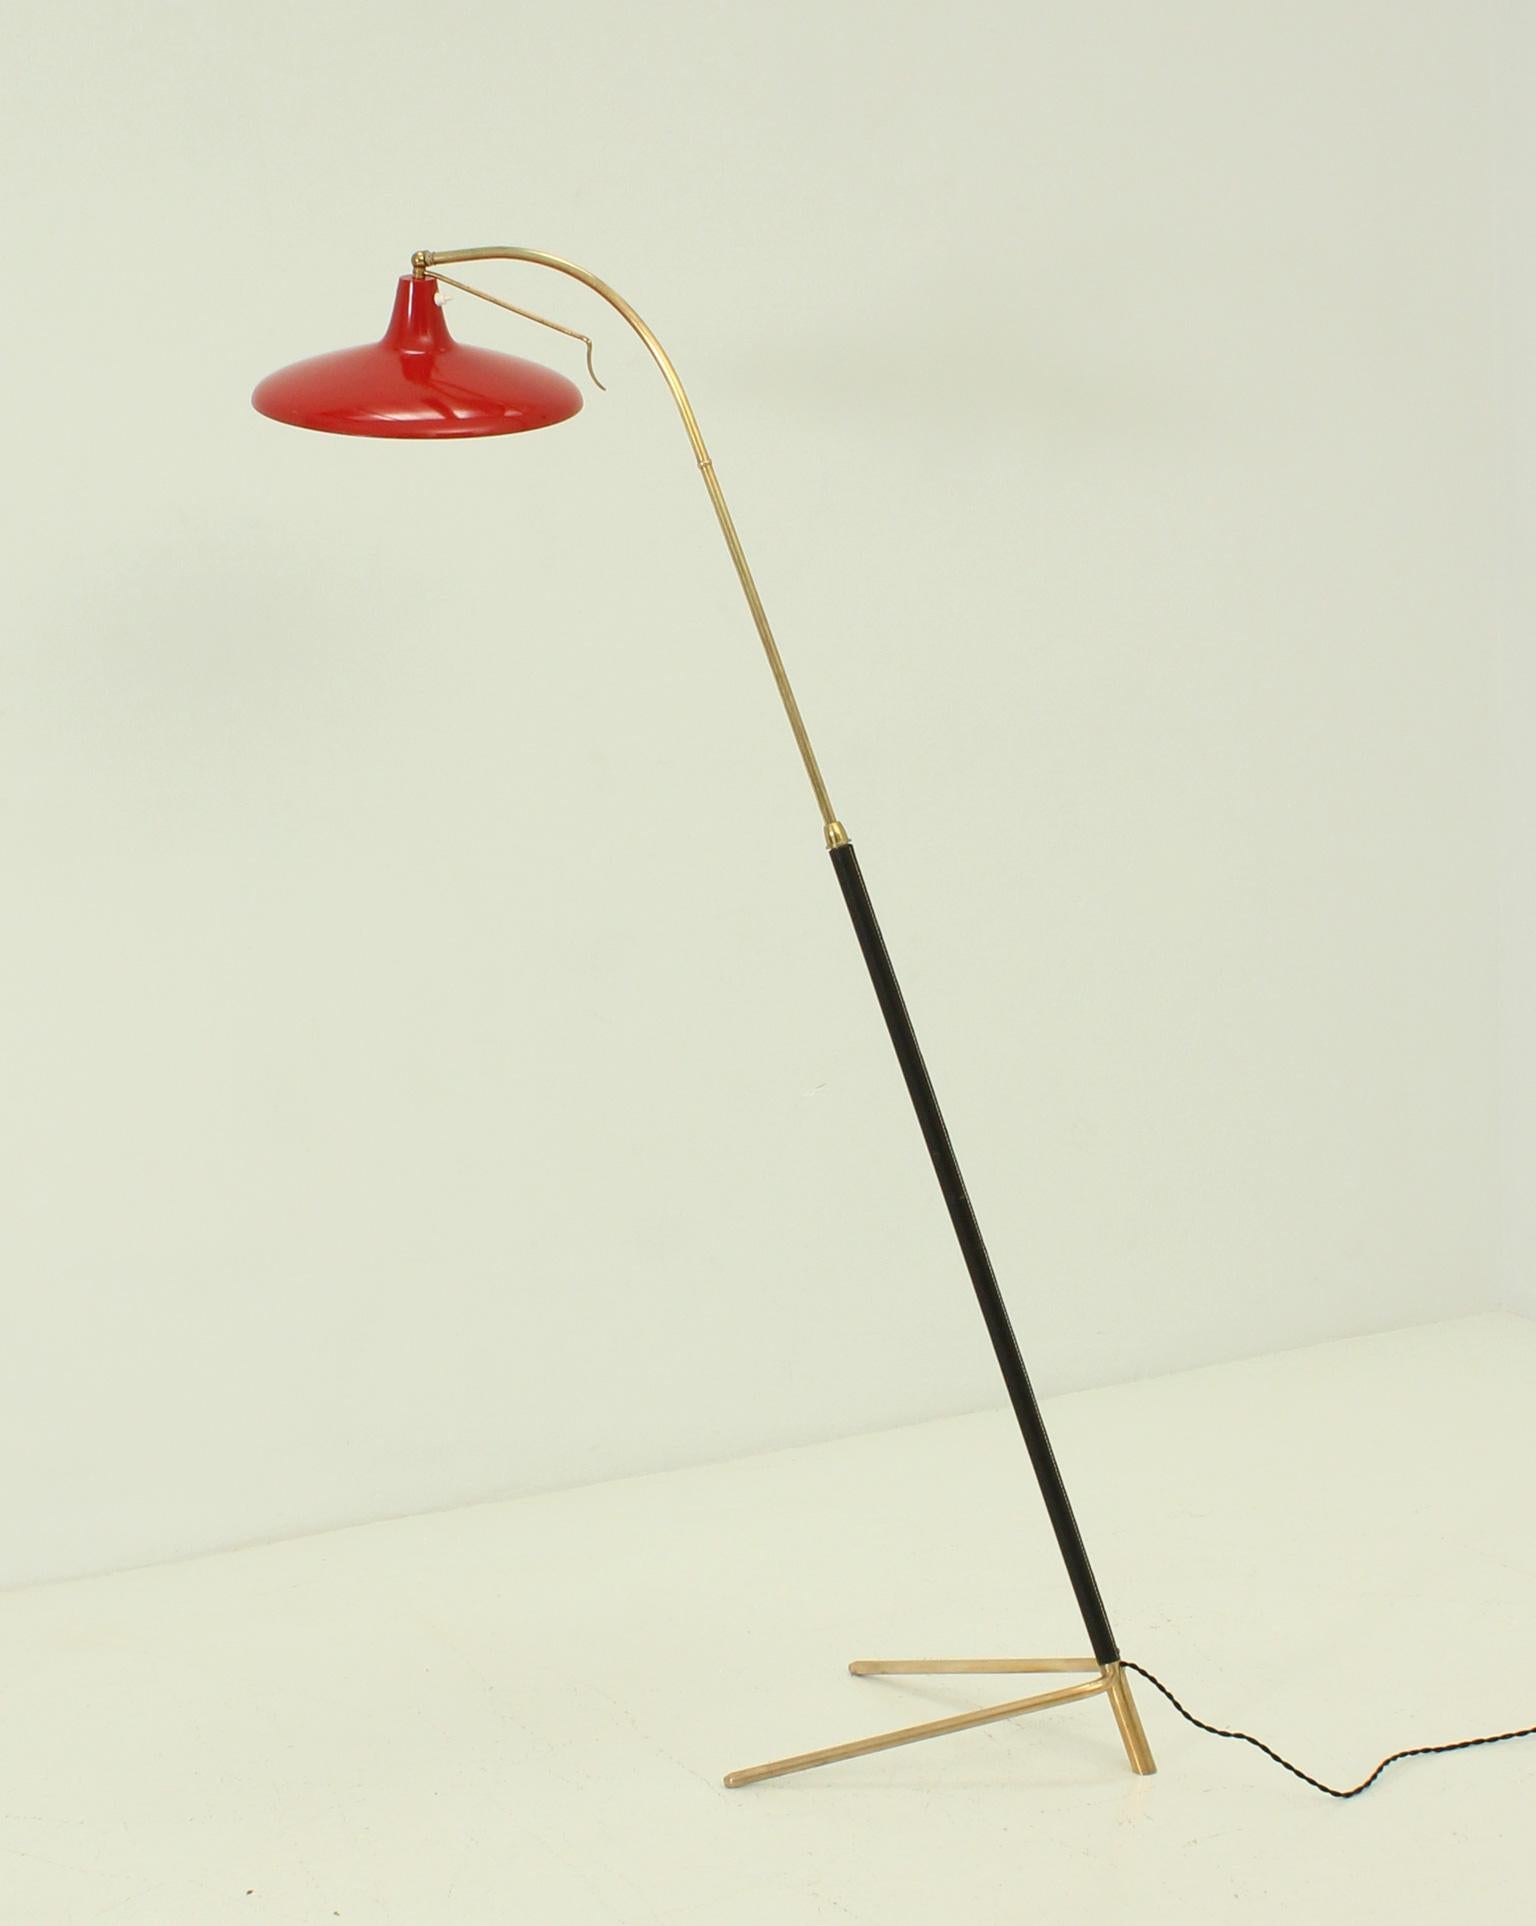 Adjustable italian floor lamp from 1950's. Shade in red enamelled metal with movable kneecap to adjust different positions, sterm in brass and black leather adjusted in height from 152 to 182 cm.